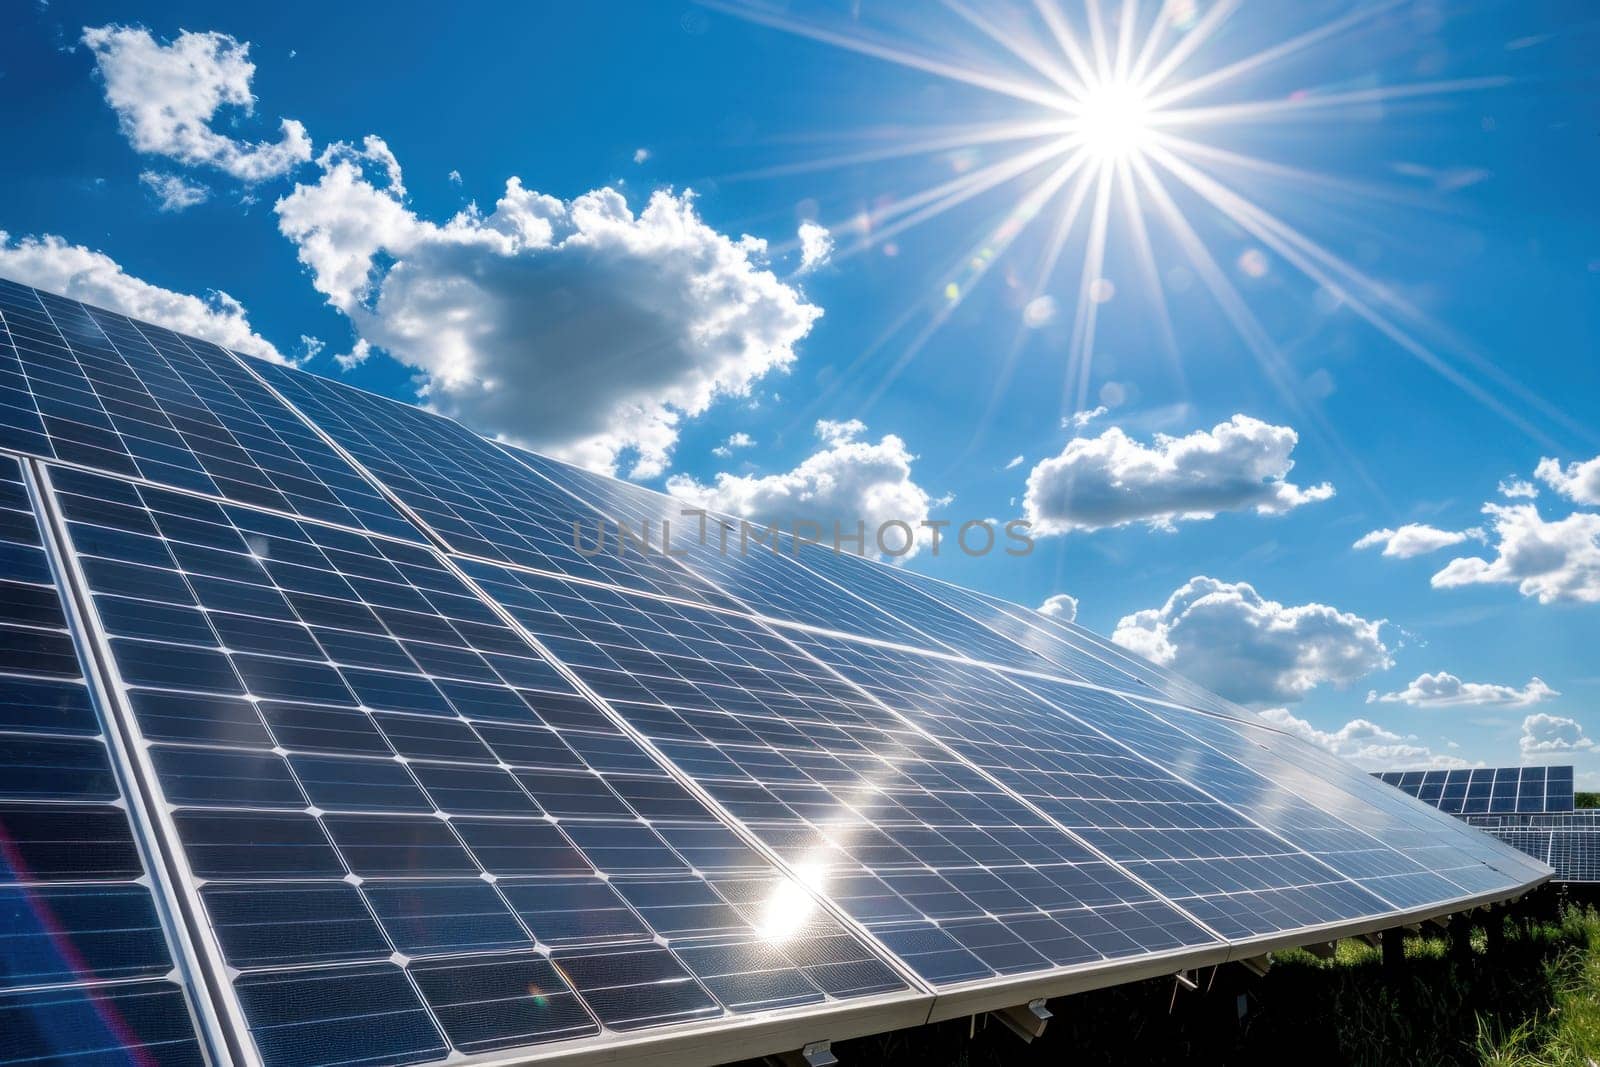 A solar panel array is shown in the sunlight by golfmerrymaker